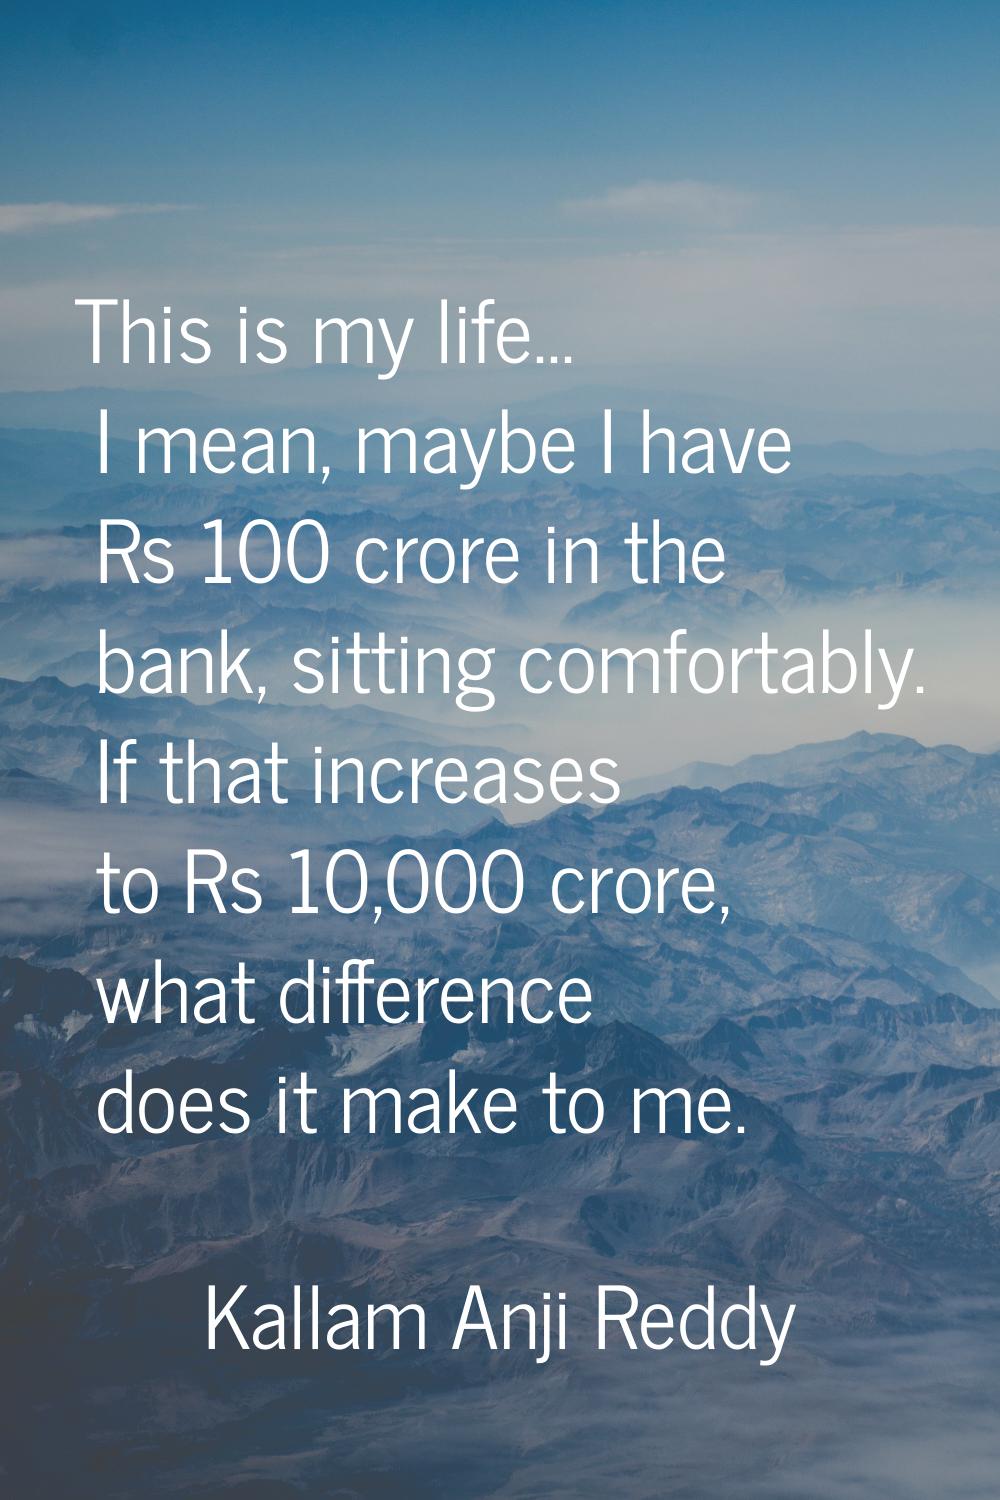 This is my life... I mean, maybe I have Rs 100 crore in the bank, sitting comfortably. If that incr